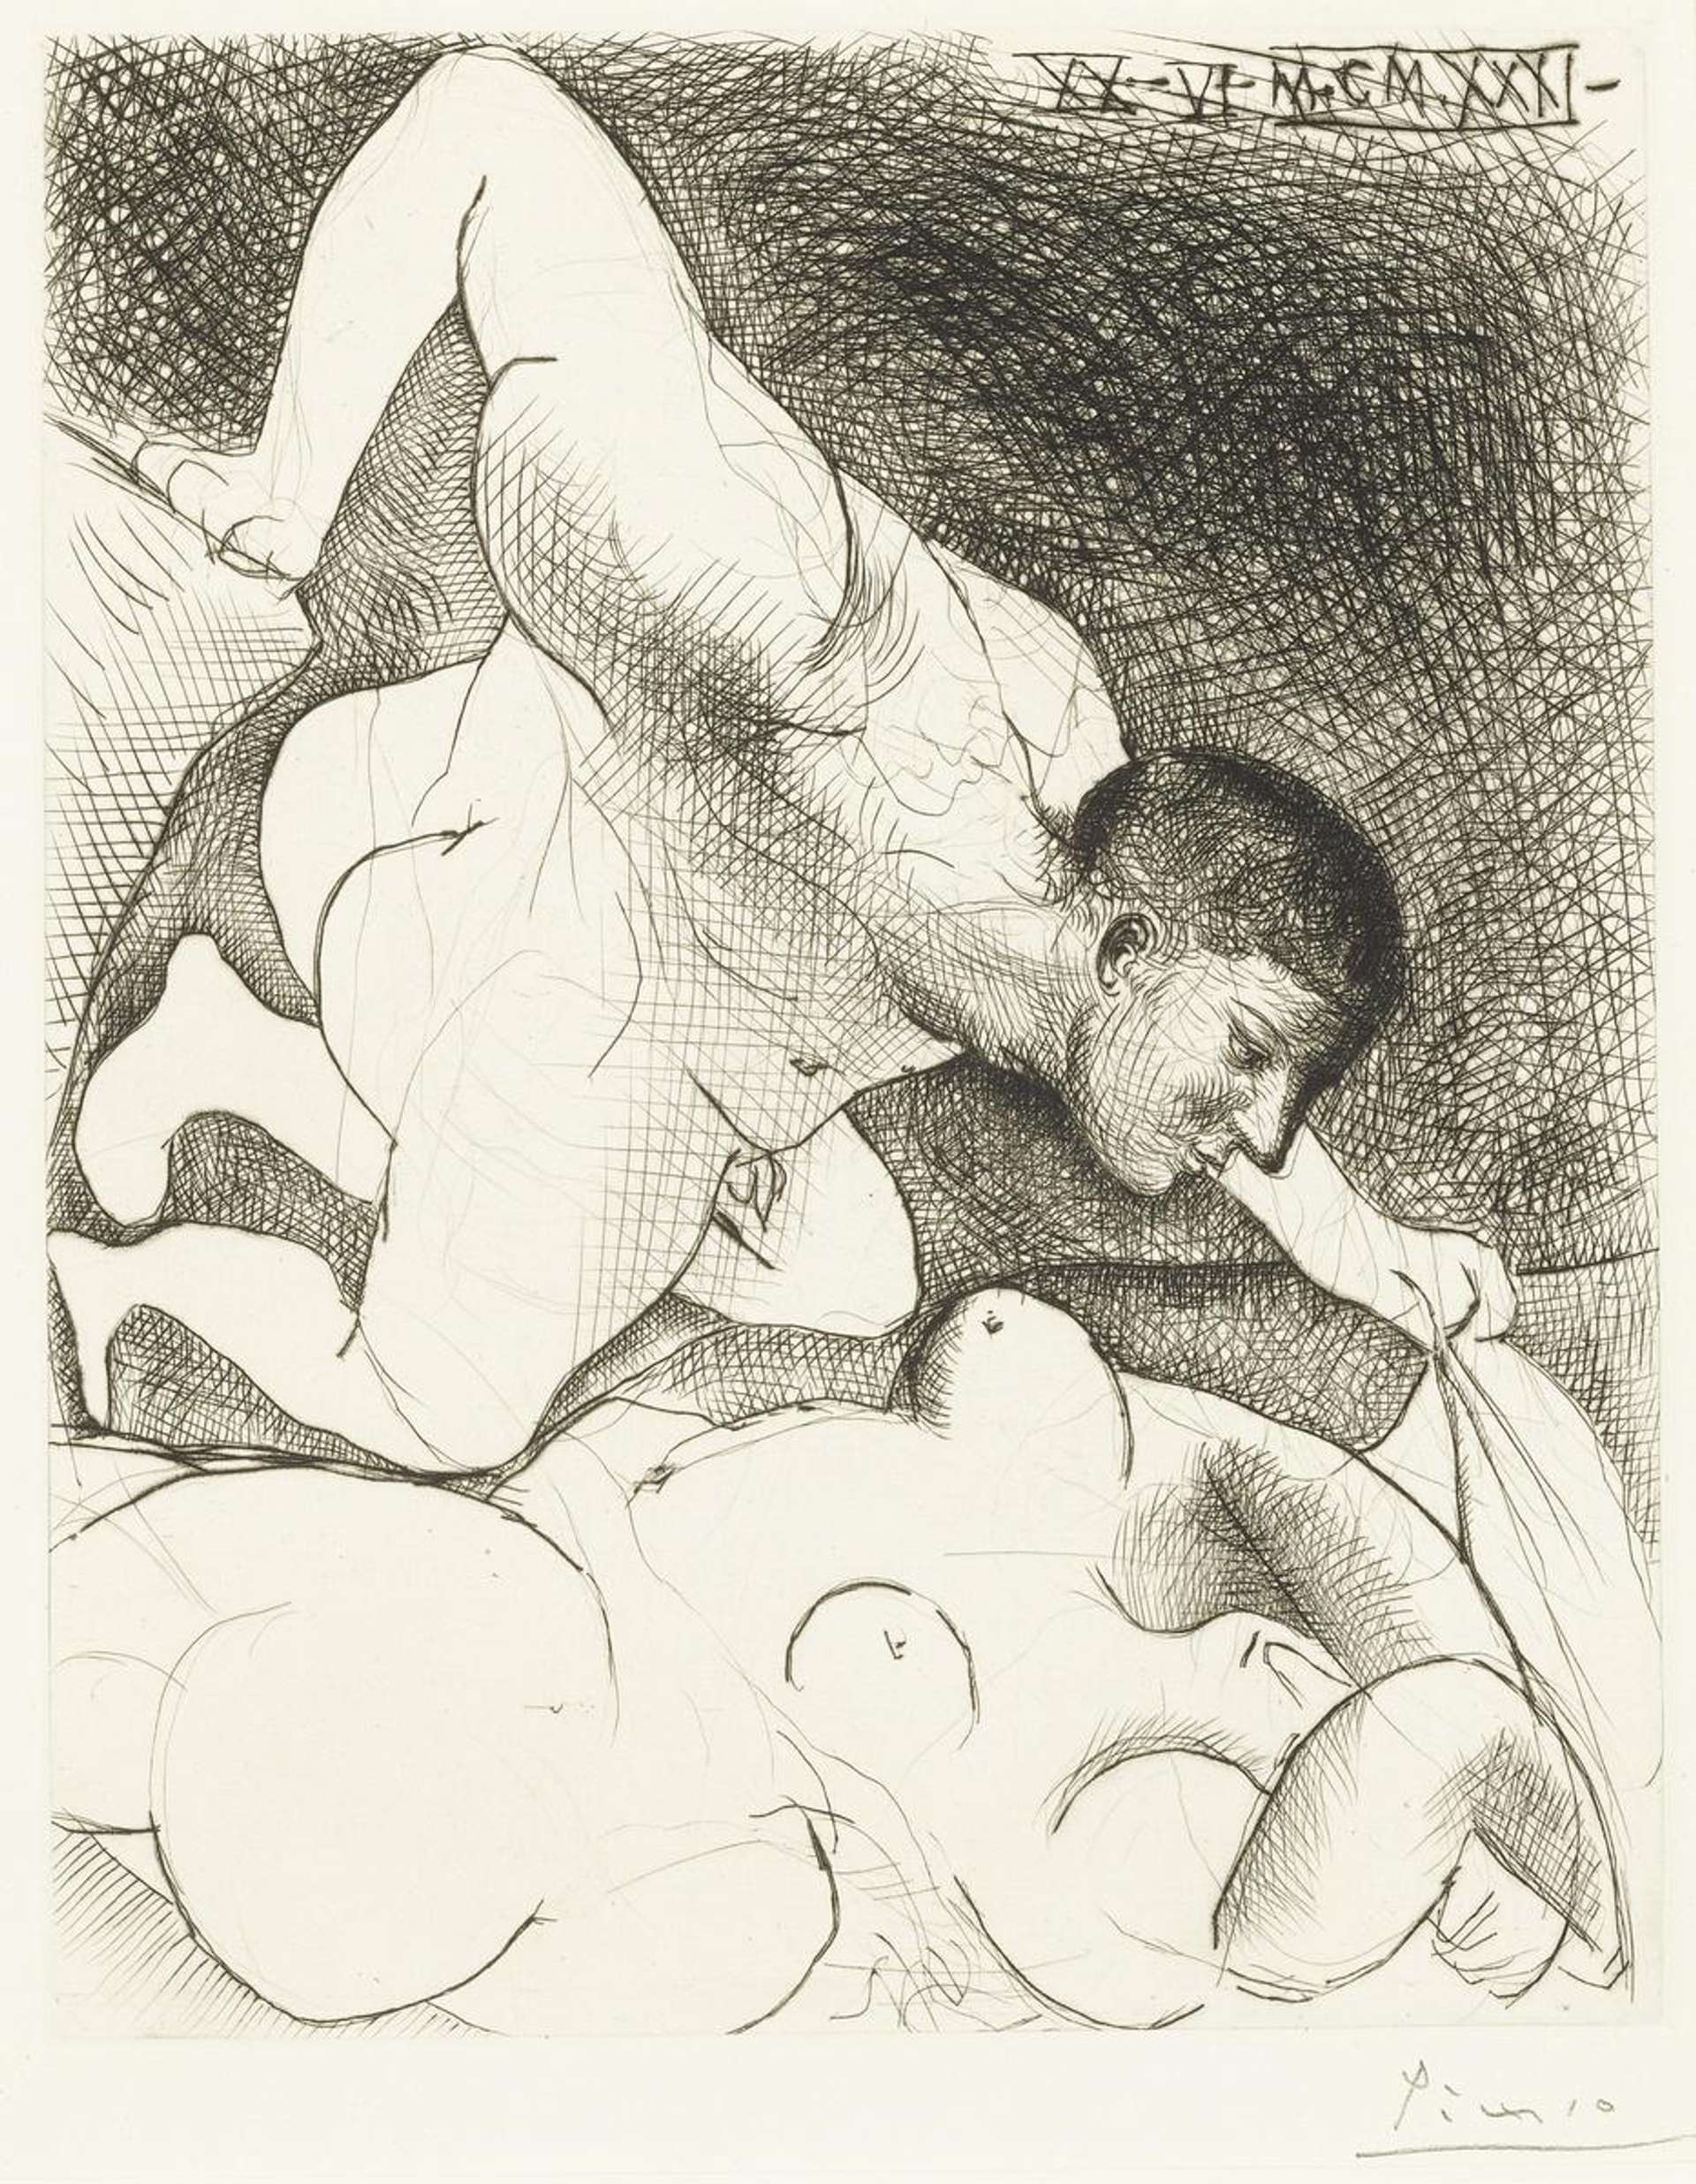 This monochrome print by Pablo Picasso shows a male figure uncovering a prone nude female figure.